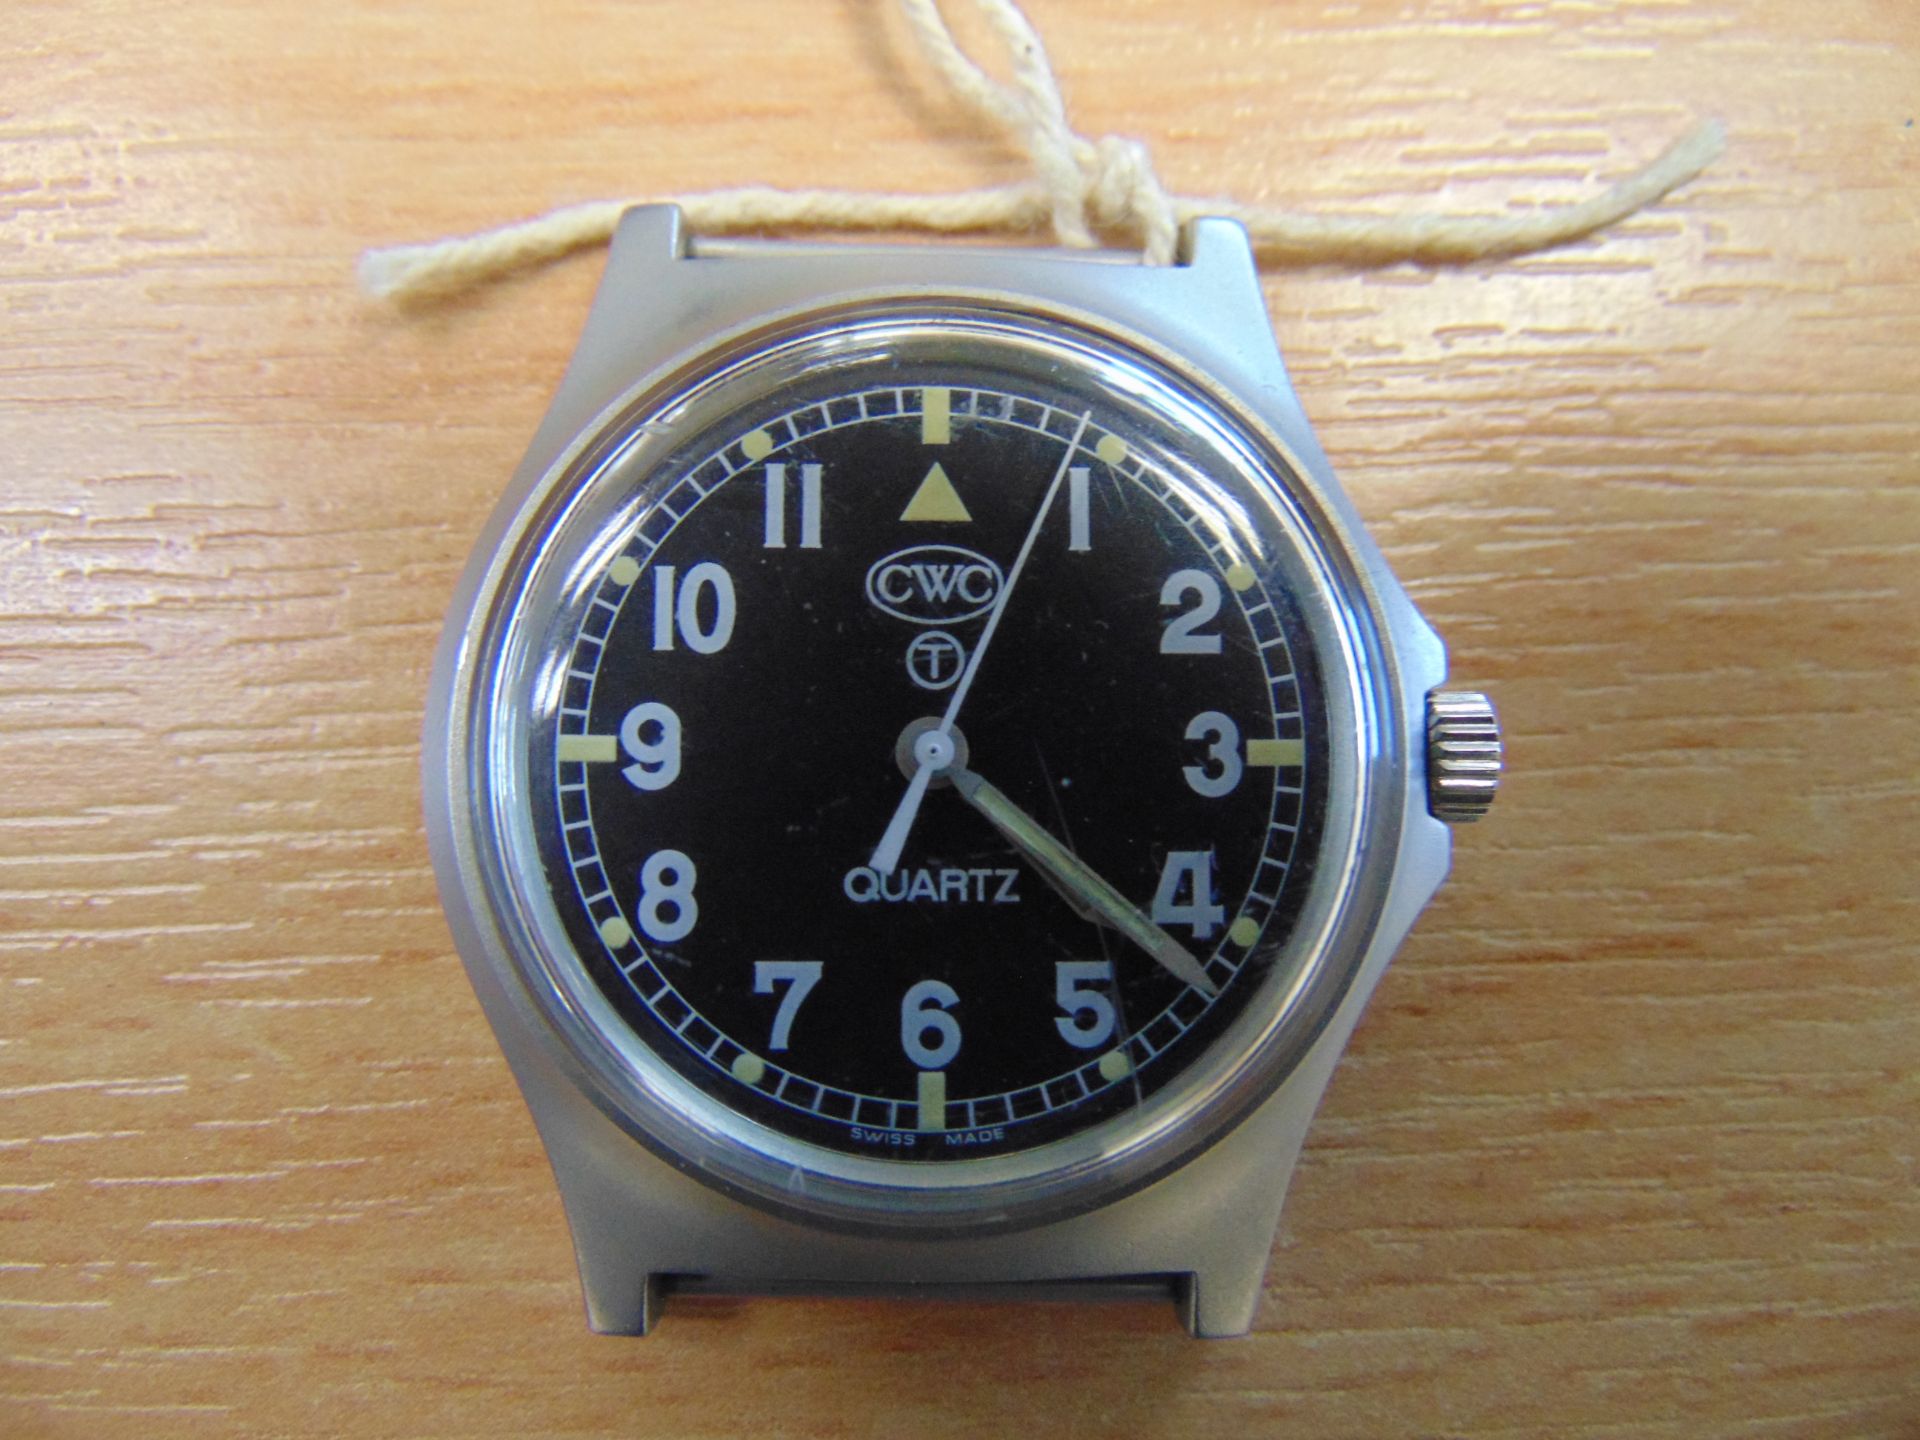 V Nice CWC W10 British Army Service Watch Water Proof to 5ATM Nato Marks, Date 2005, New Battery - Image 2 of 4